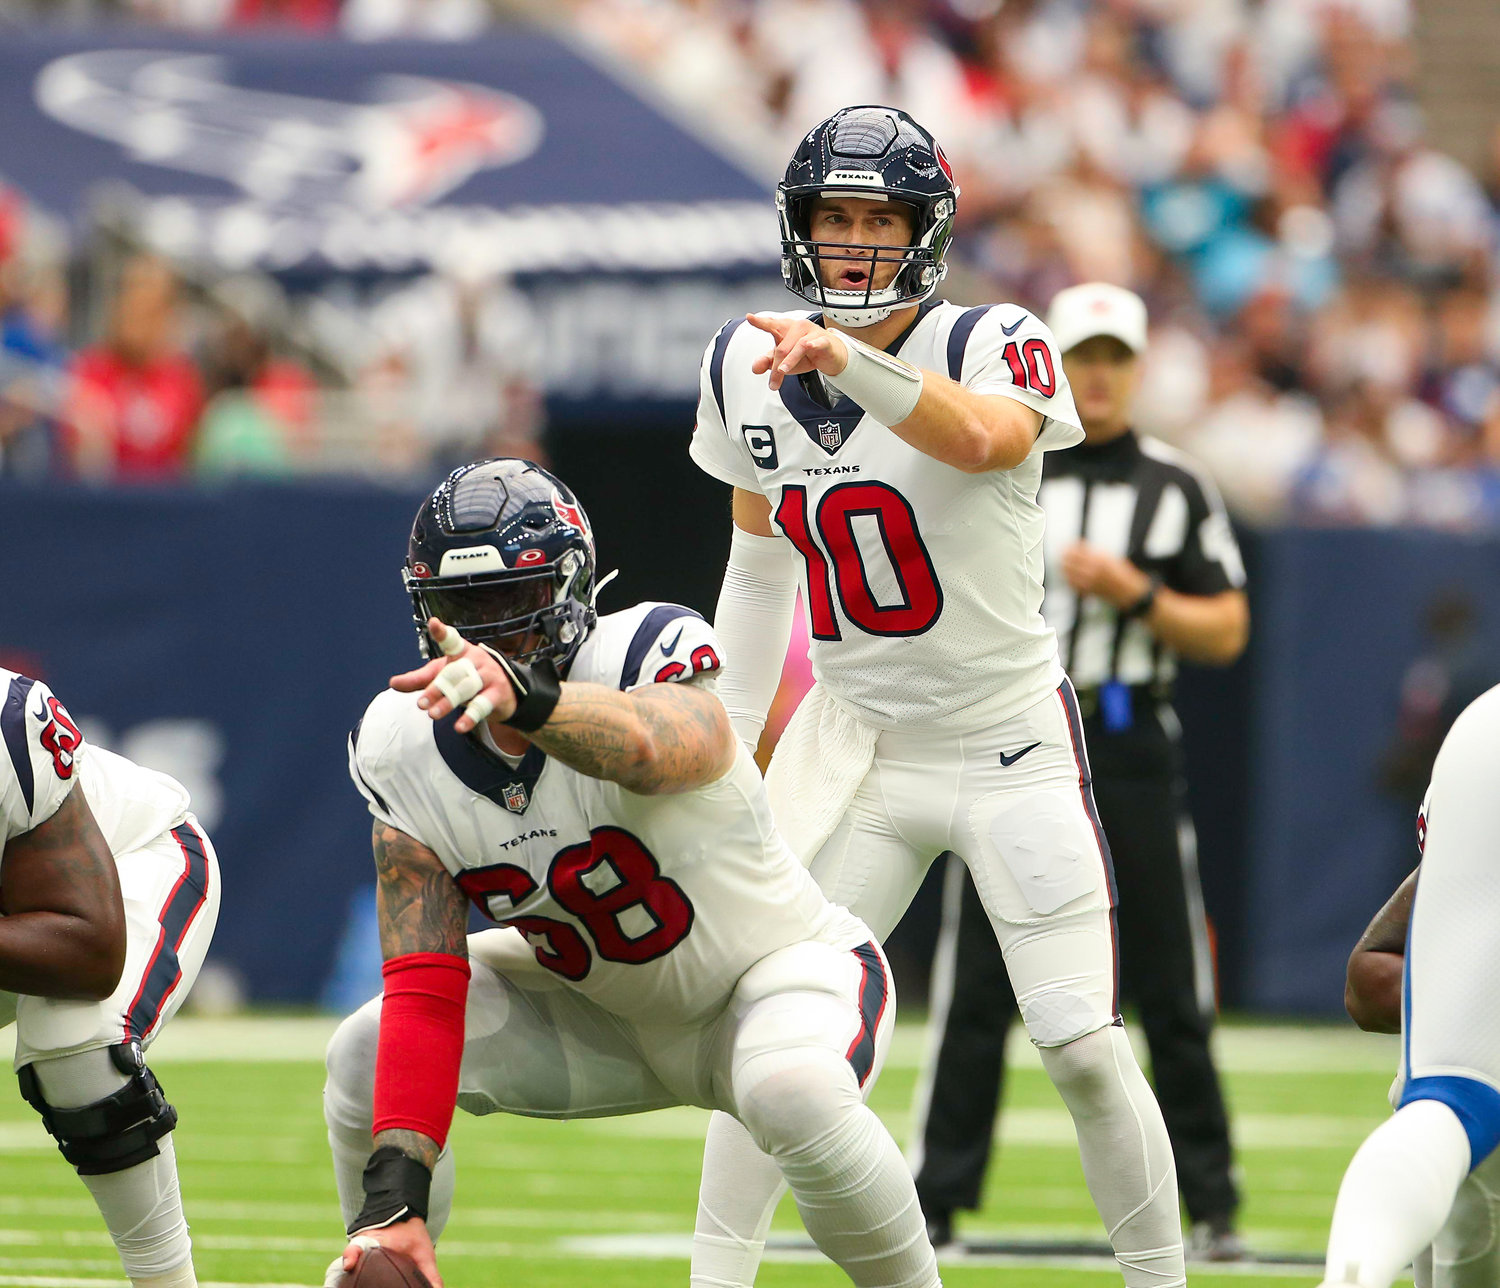 Houston Texans quarterback Davis Mills (10) calls signals before a snap during an NFL game between the Texans and the Colts on September 11, 2022 in Houston. The game ended in a 20-20 tie after a scoreless overtime period.